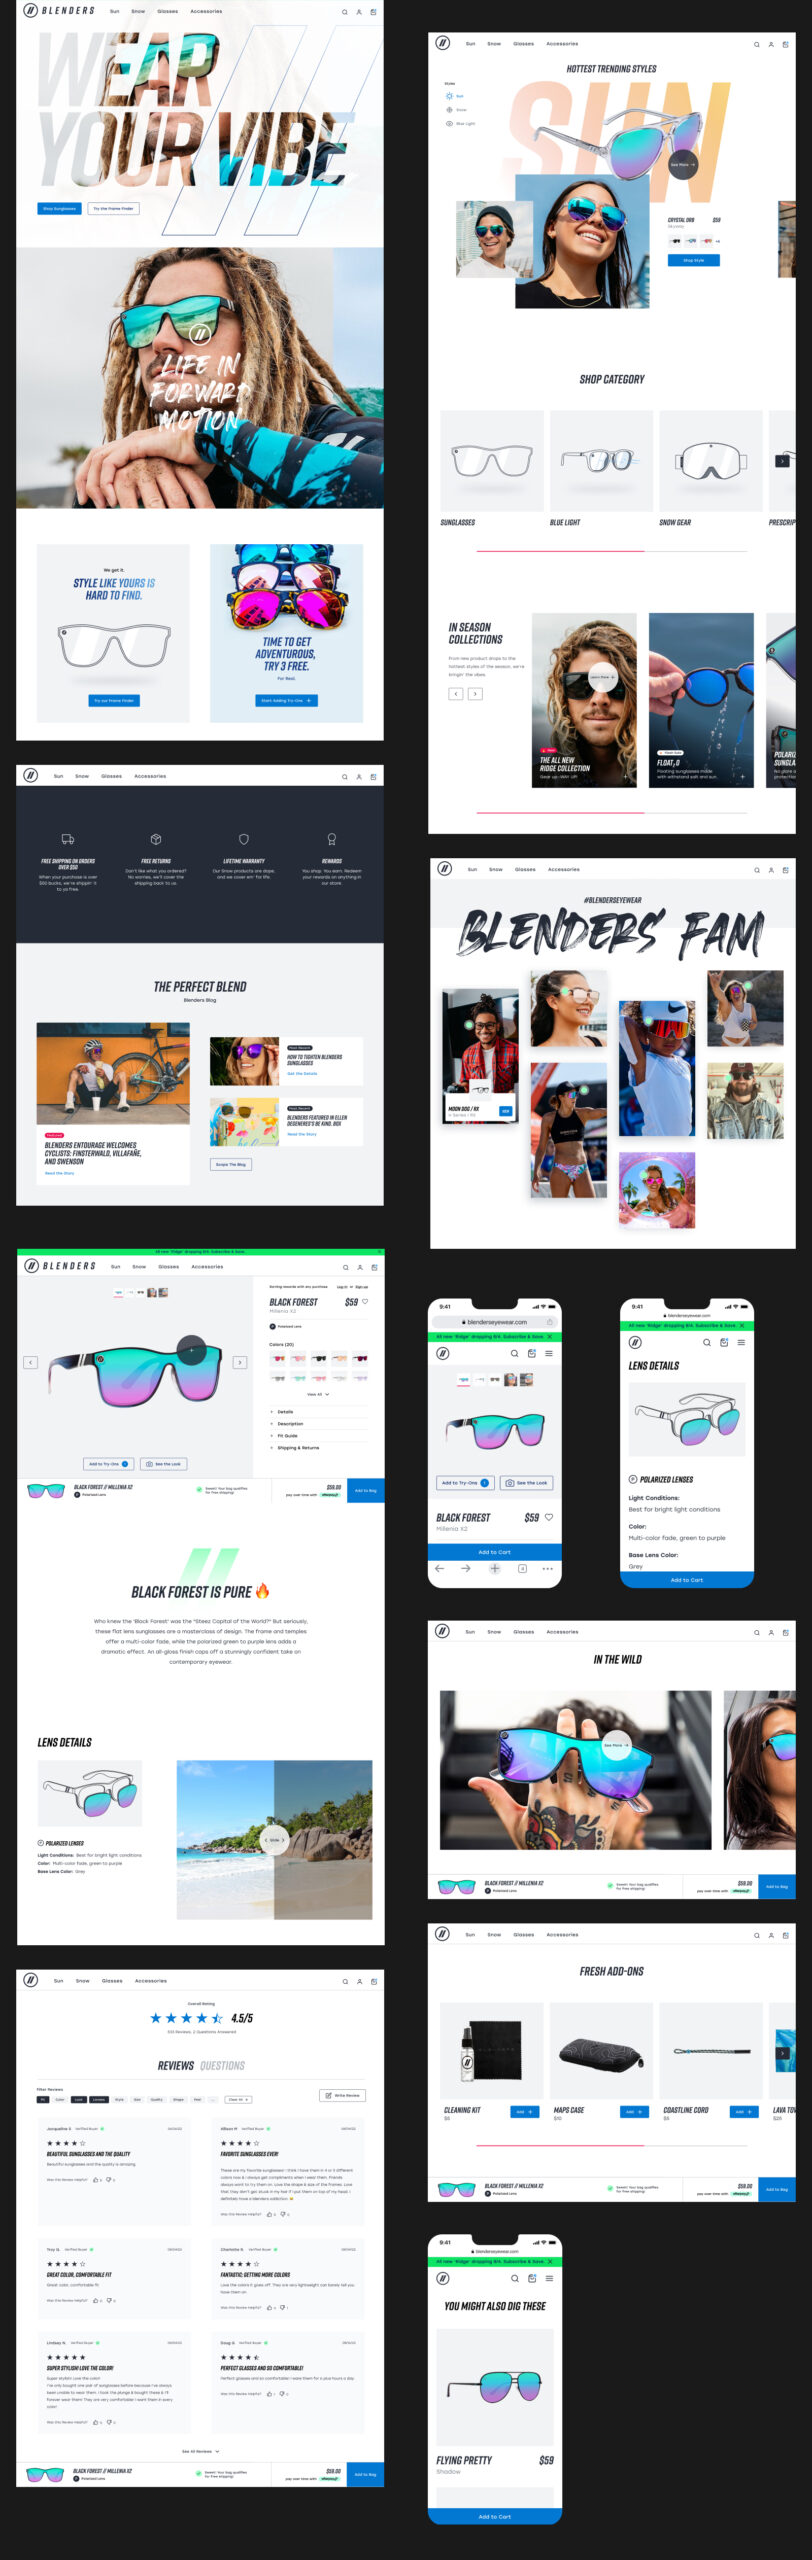 Digital Experience Pages